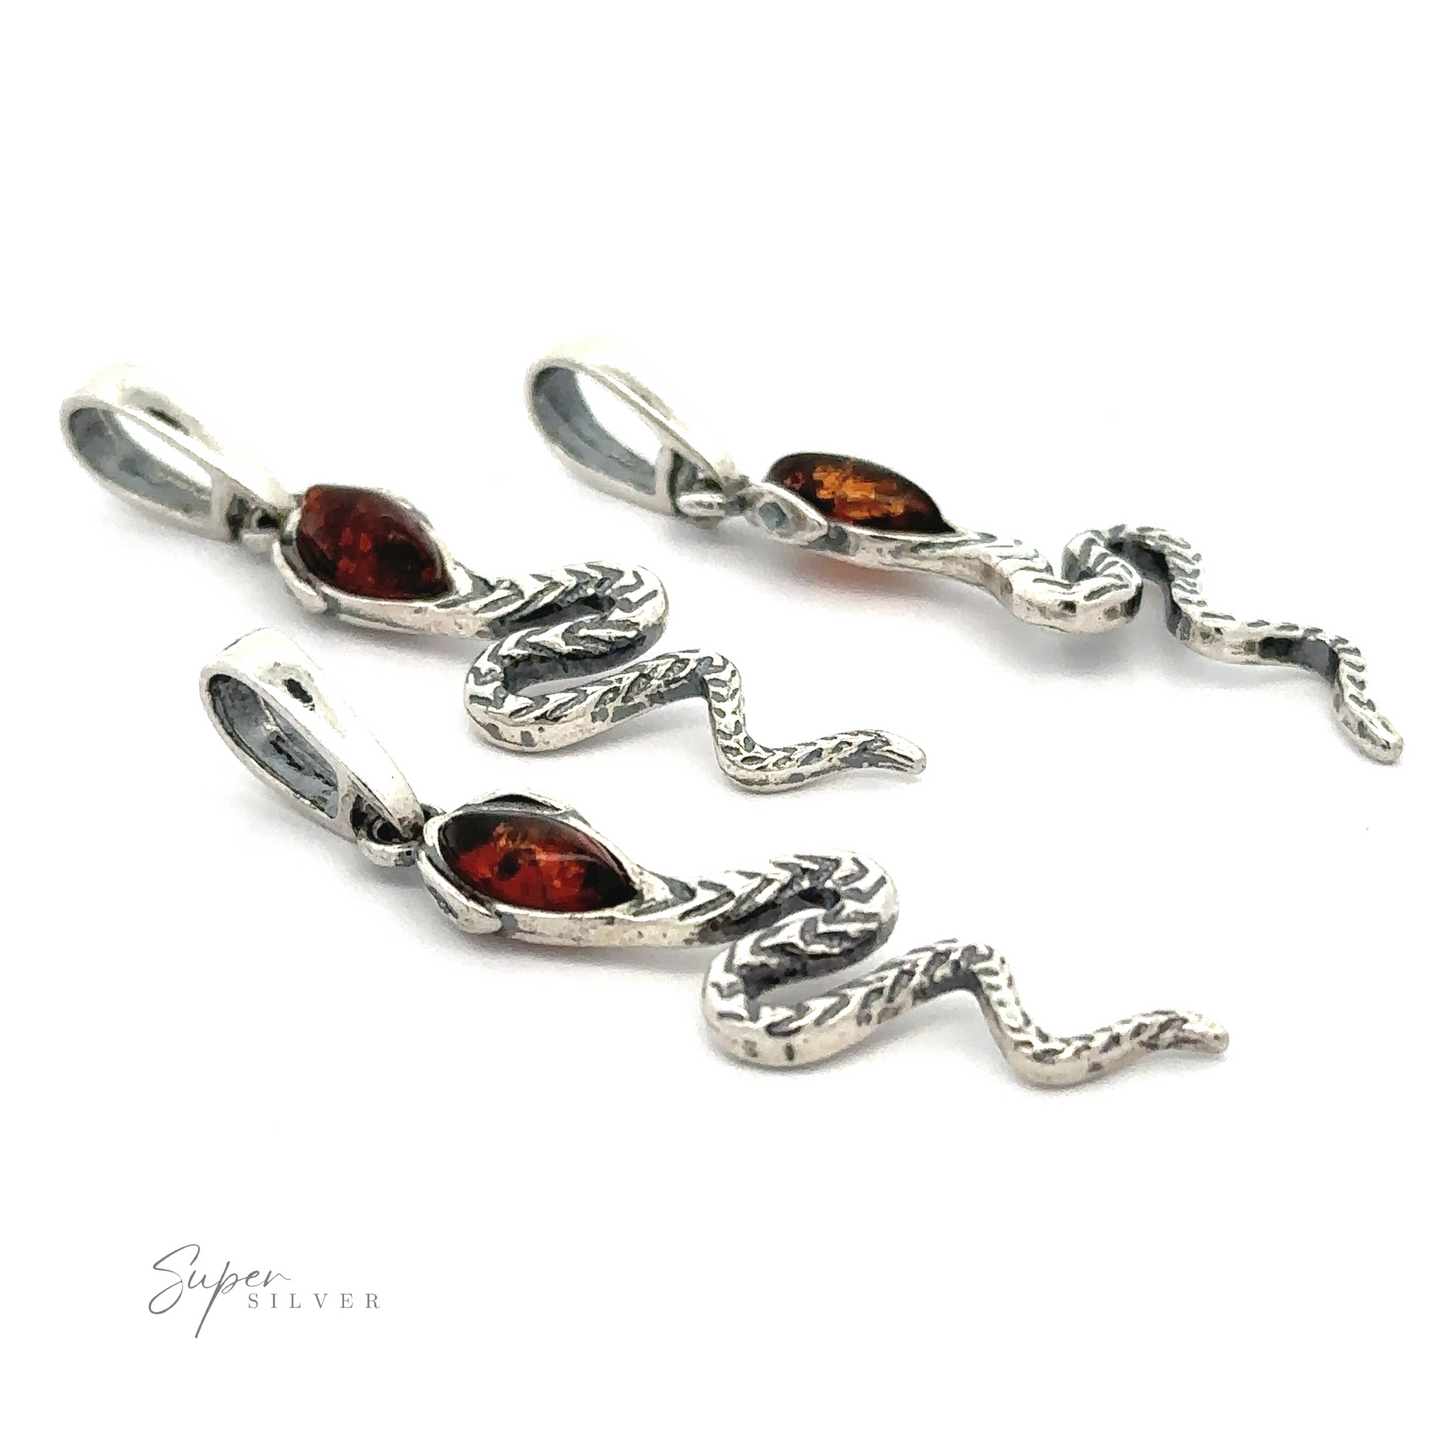 Three Alluring Amber Snake Pendants with Baltic amber stones and intricate detailing are displayed. Each snake pendant exudes a vintage vibe, complete with loops for attaching to a necklace or bracelet.